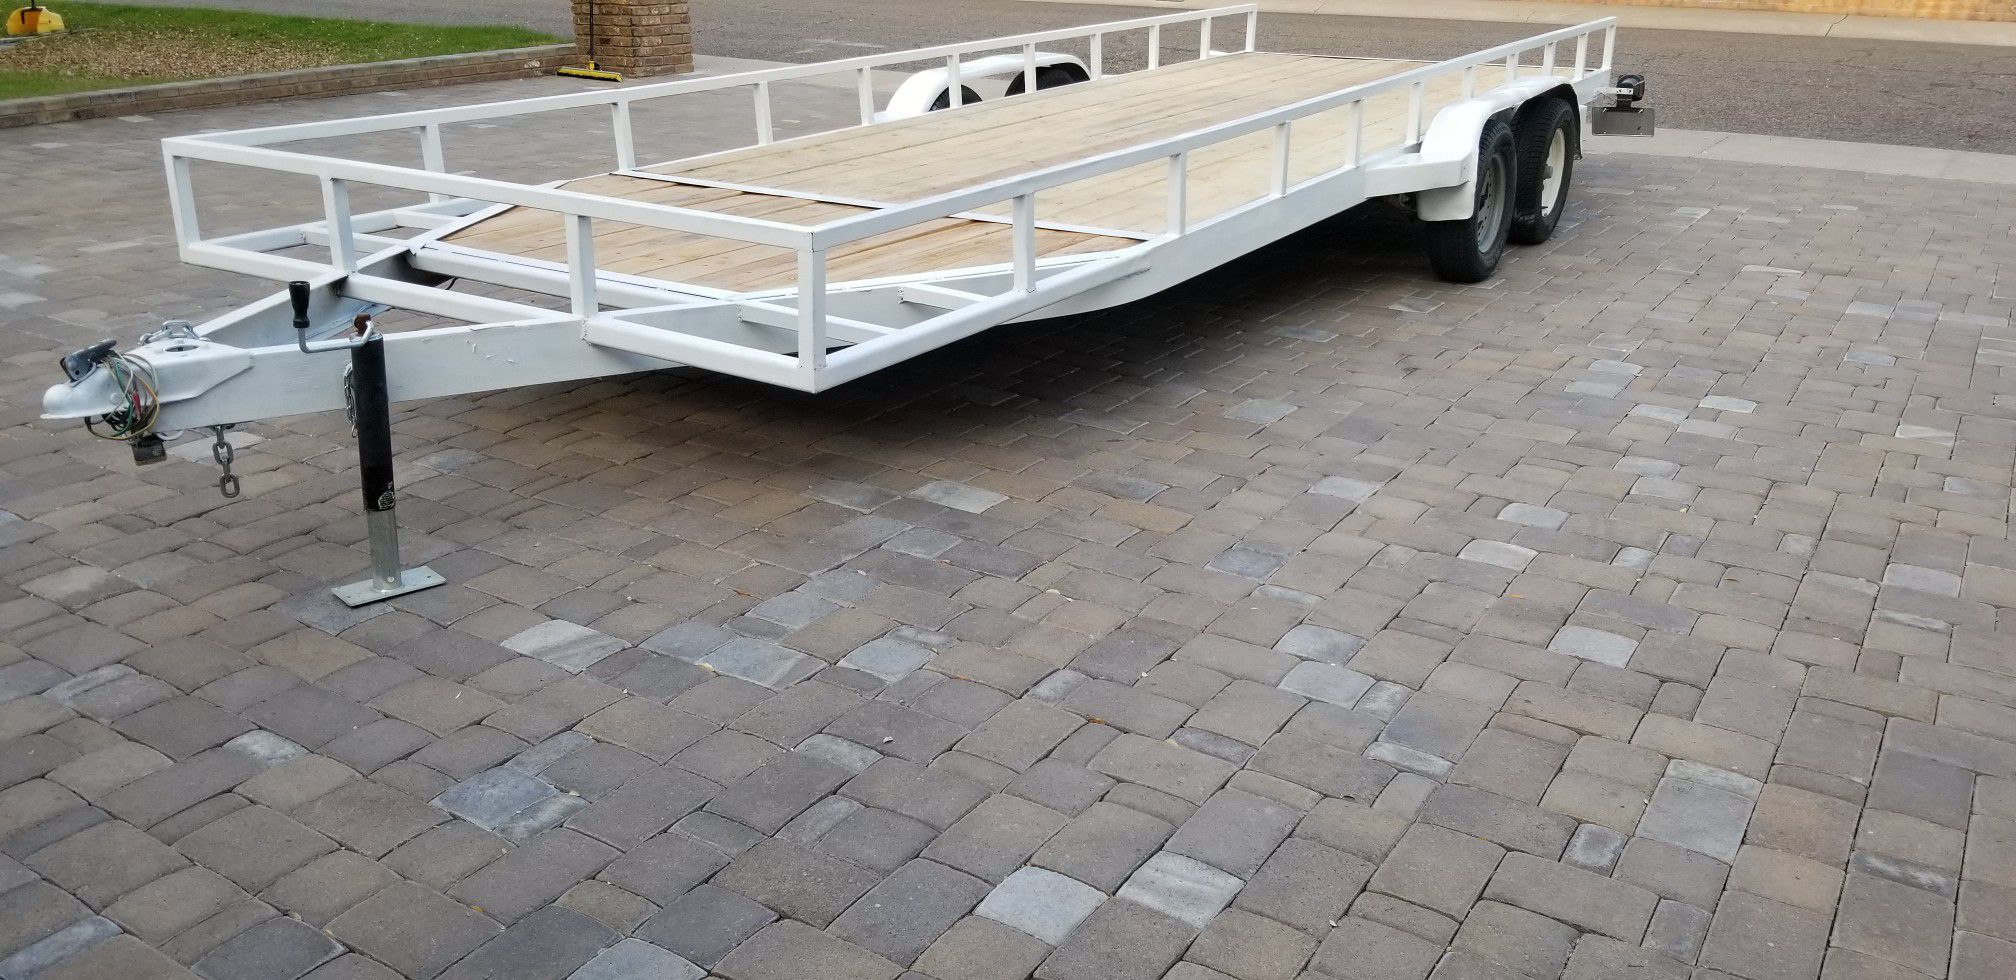 Utility Trailer / Flat Bed / Enclosed , 20 ft 8 inches long x 6ft 5 inches wide. New Wood, Title in hand, Good Tires, 2 inch ball. Ramp, Dual Axle